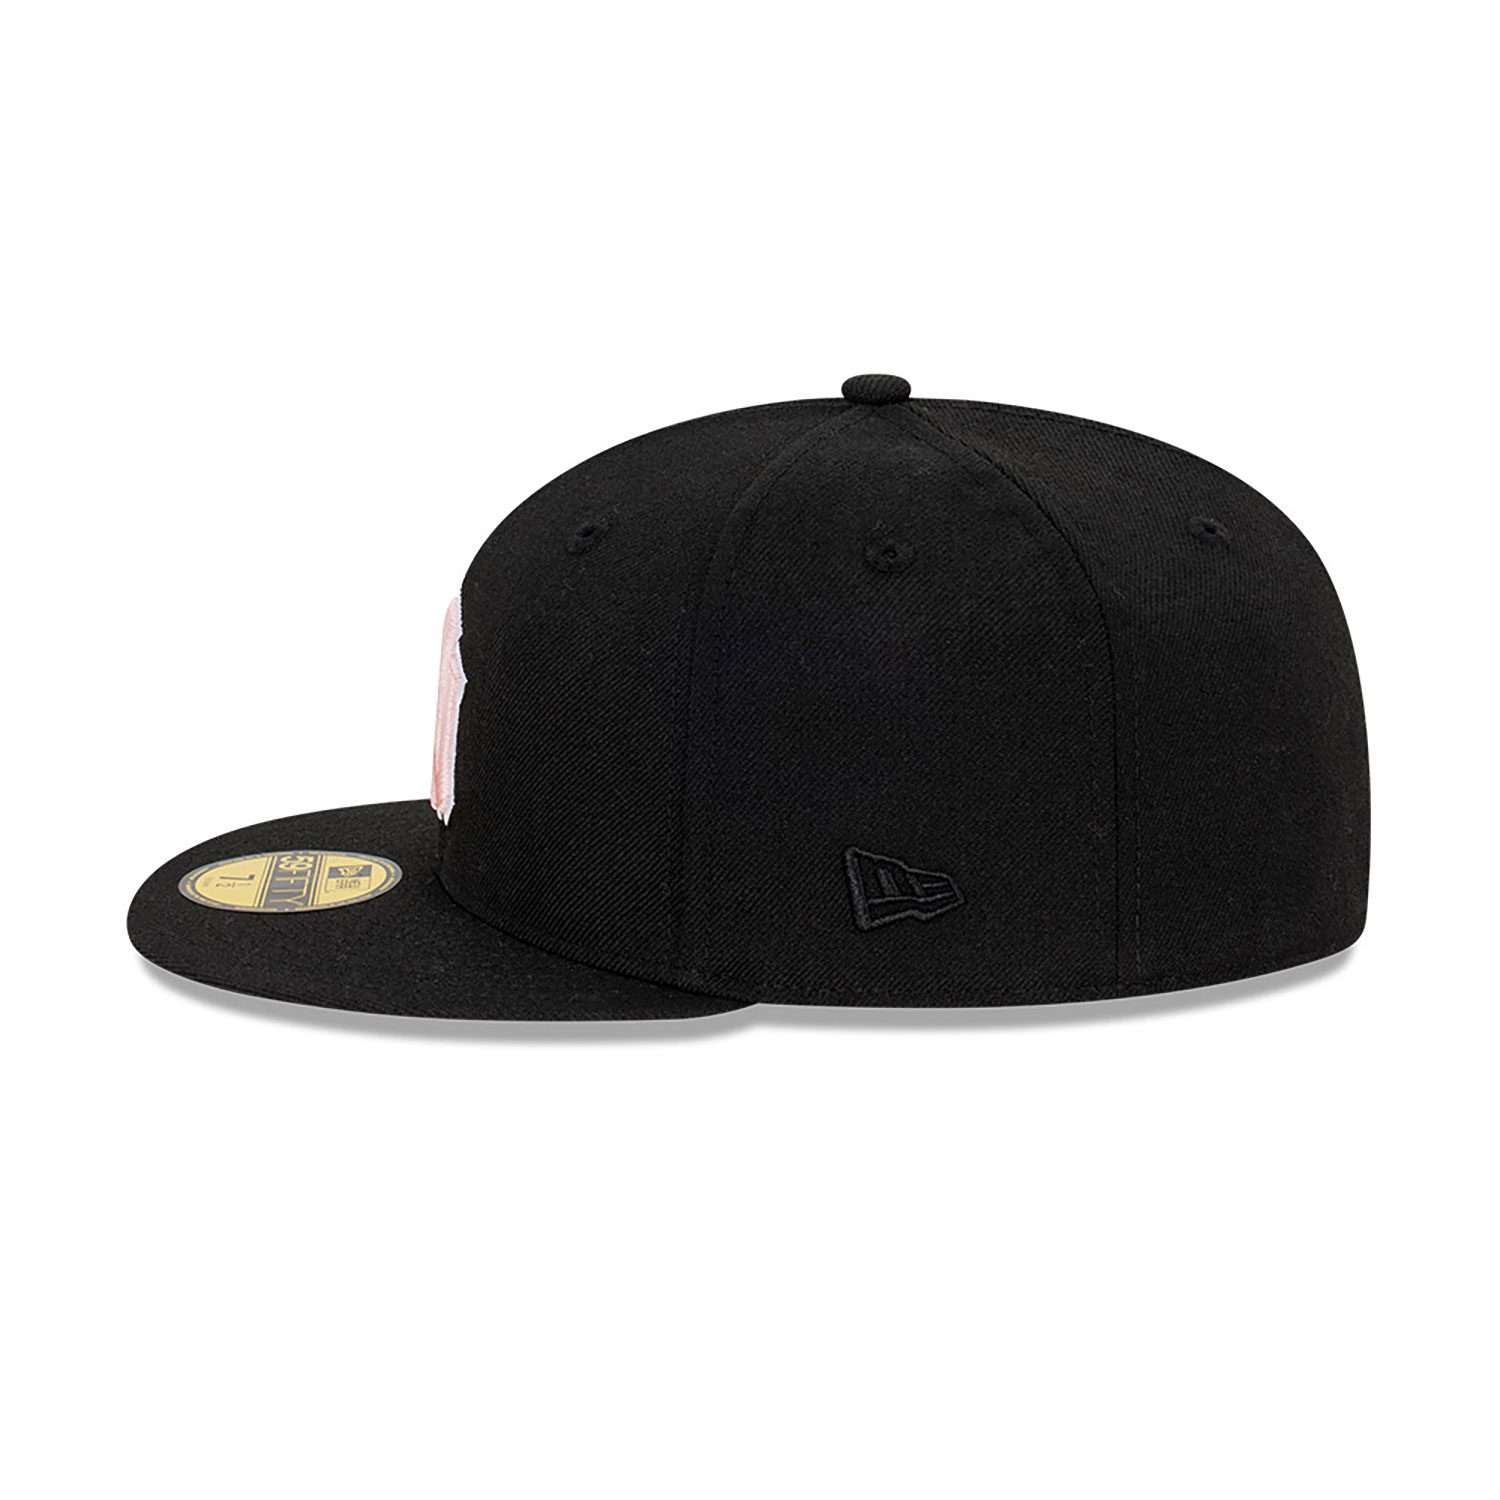 New York Yankees All Sorts Black 59FIFTY Fitted Cap